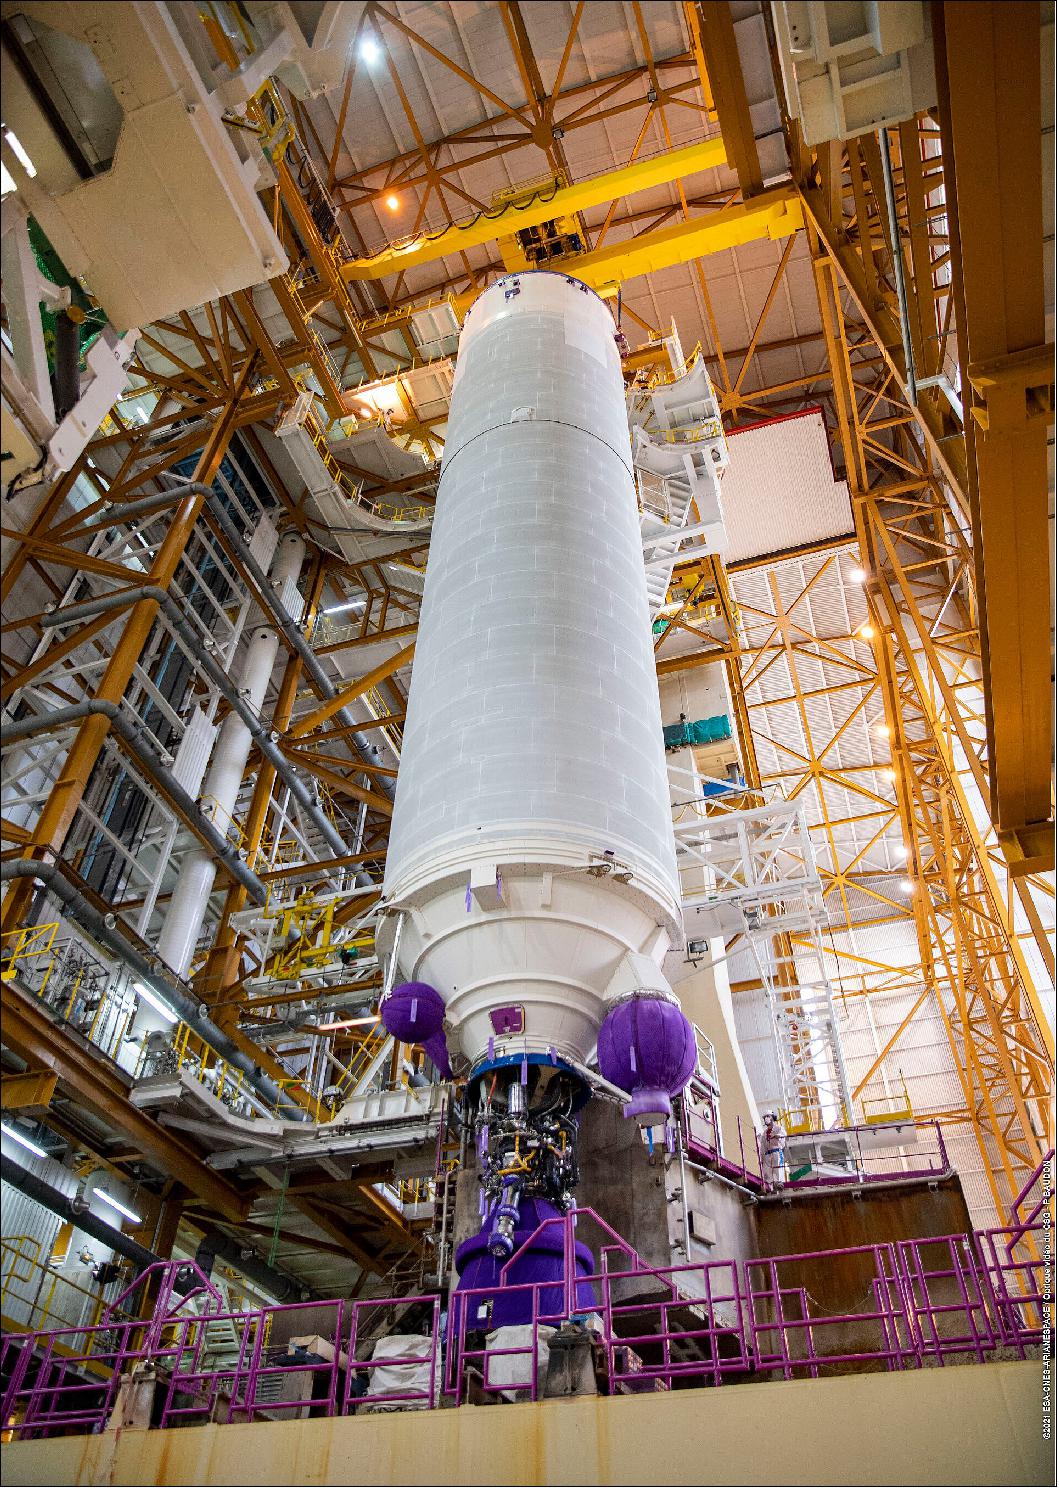 Figure 7: Ariane 5 parts are coming together in the launch vehicle integration building for the launch of Webb from Europe's Spaceport in French Guiana (image credit: ESA/CNES/Arianespace)